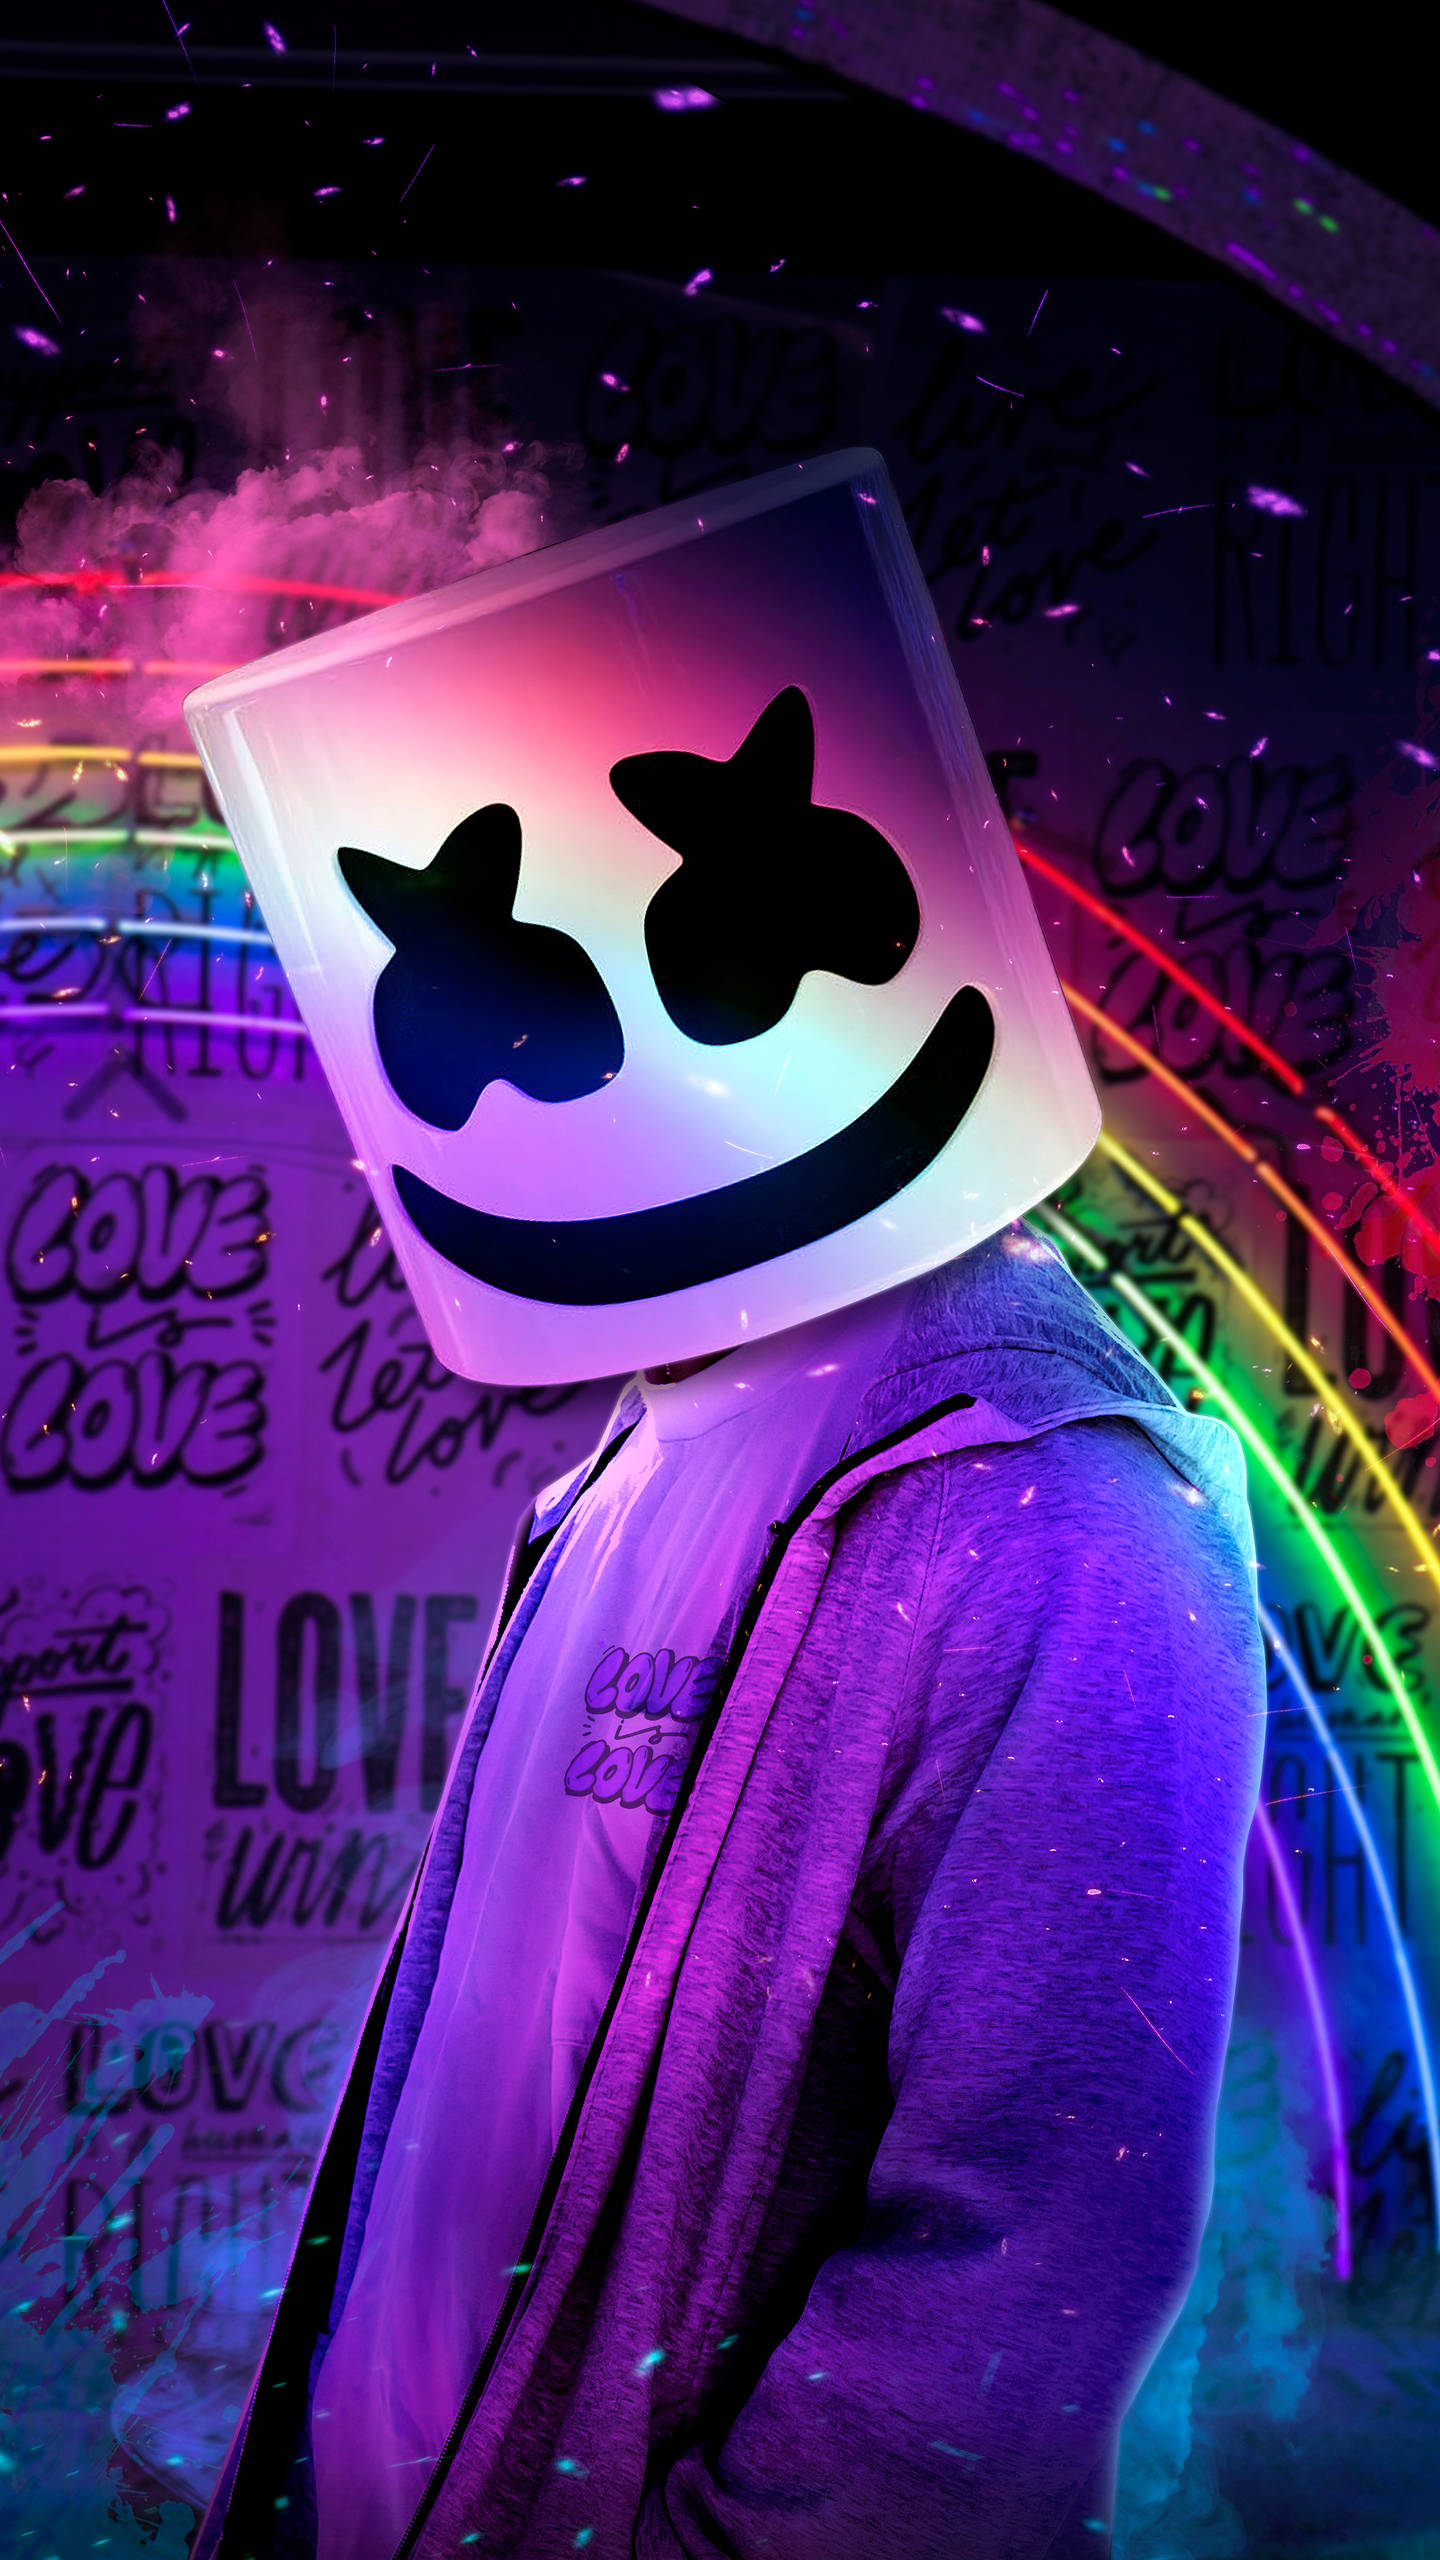 Download Rainbow Background Marshmello Hd Iphone Wallpaper | Wallpapers.com